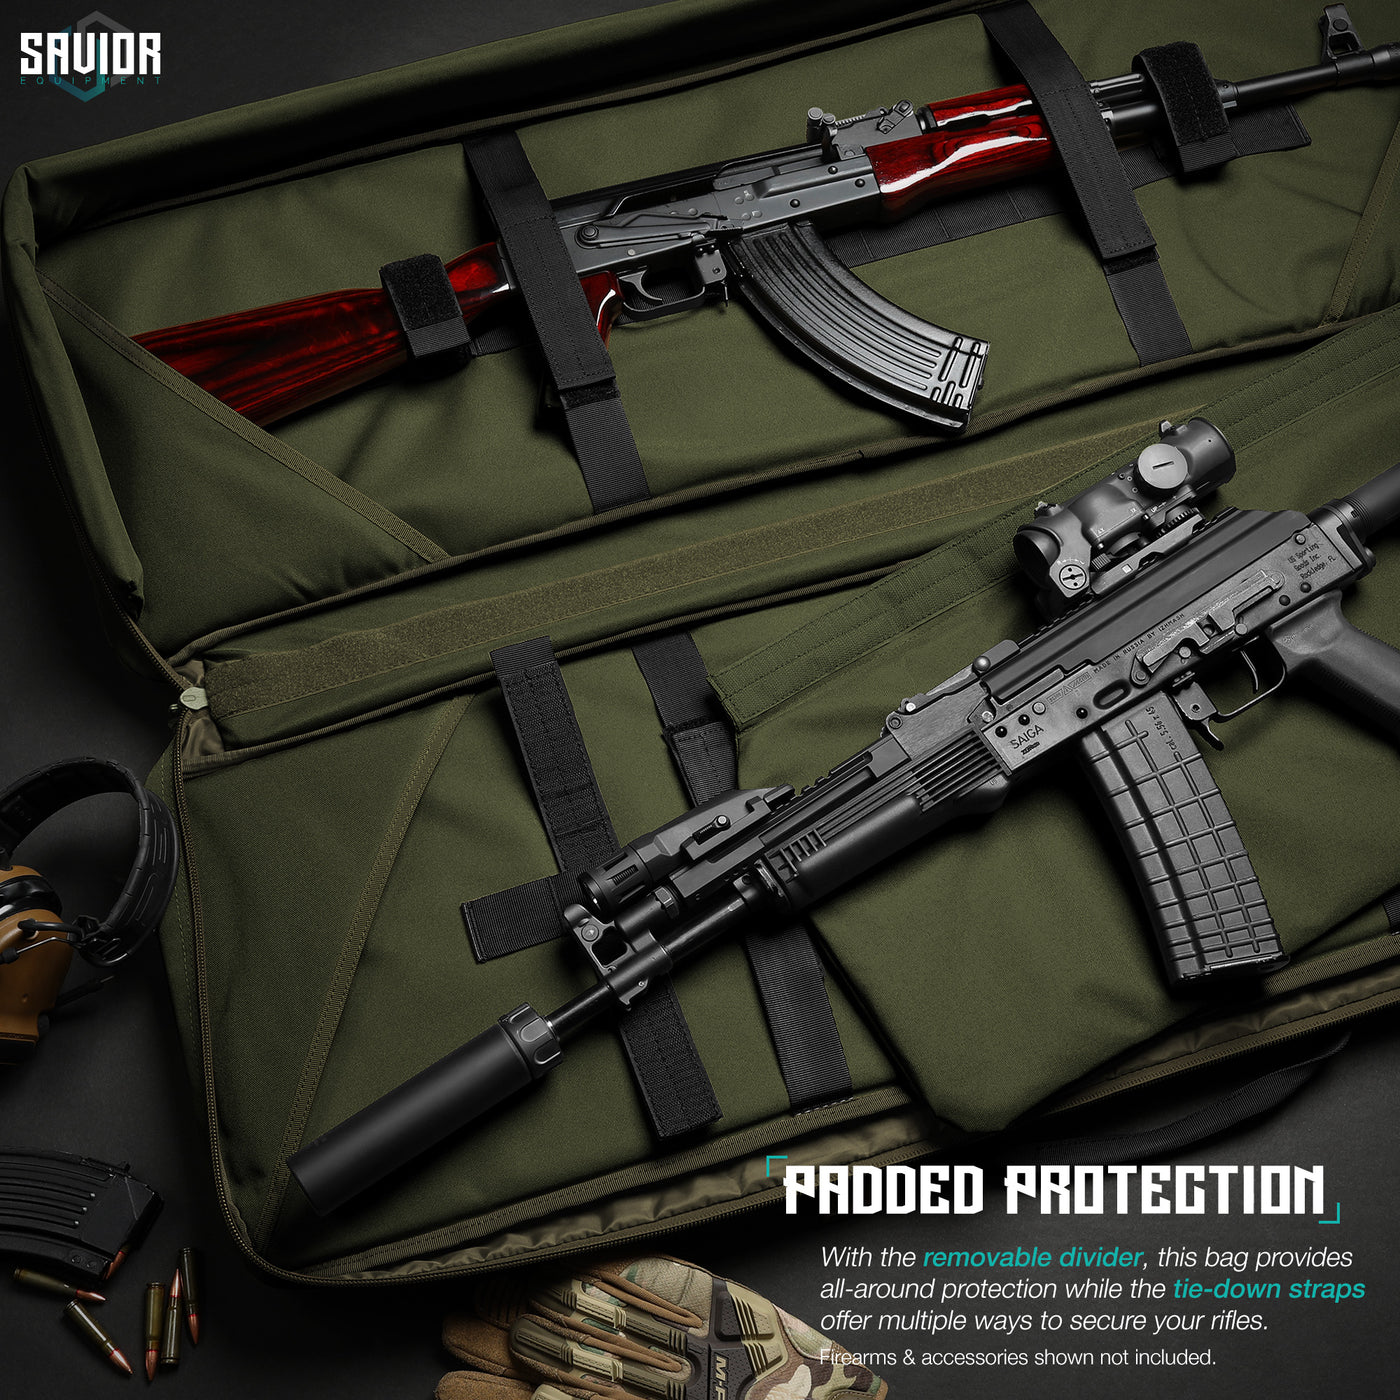 Padded Protection - With the removable divider, this bag provides all-around protection while the tie-down straps offer multiple ways to secure your rifles. Firearms & accessories shown not included.